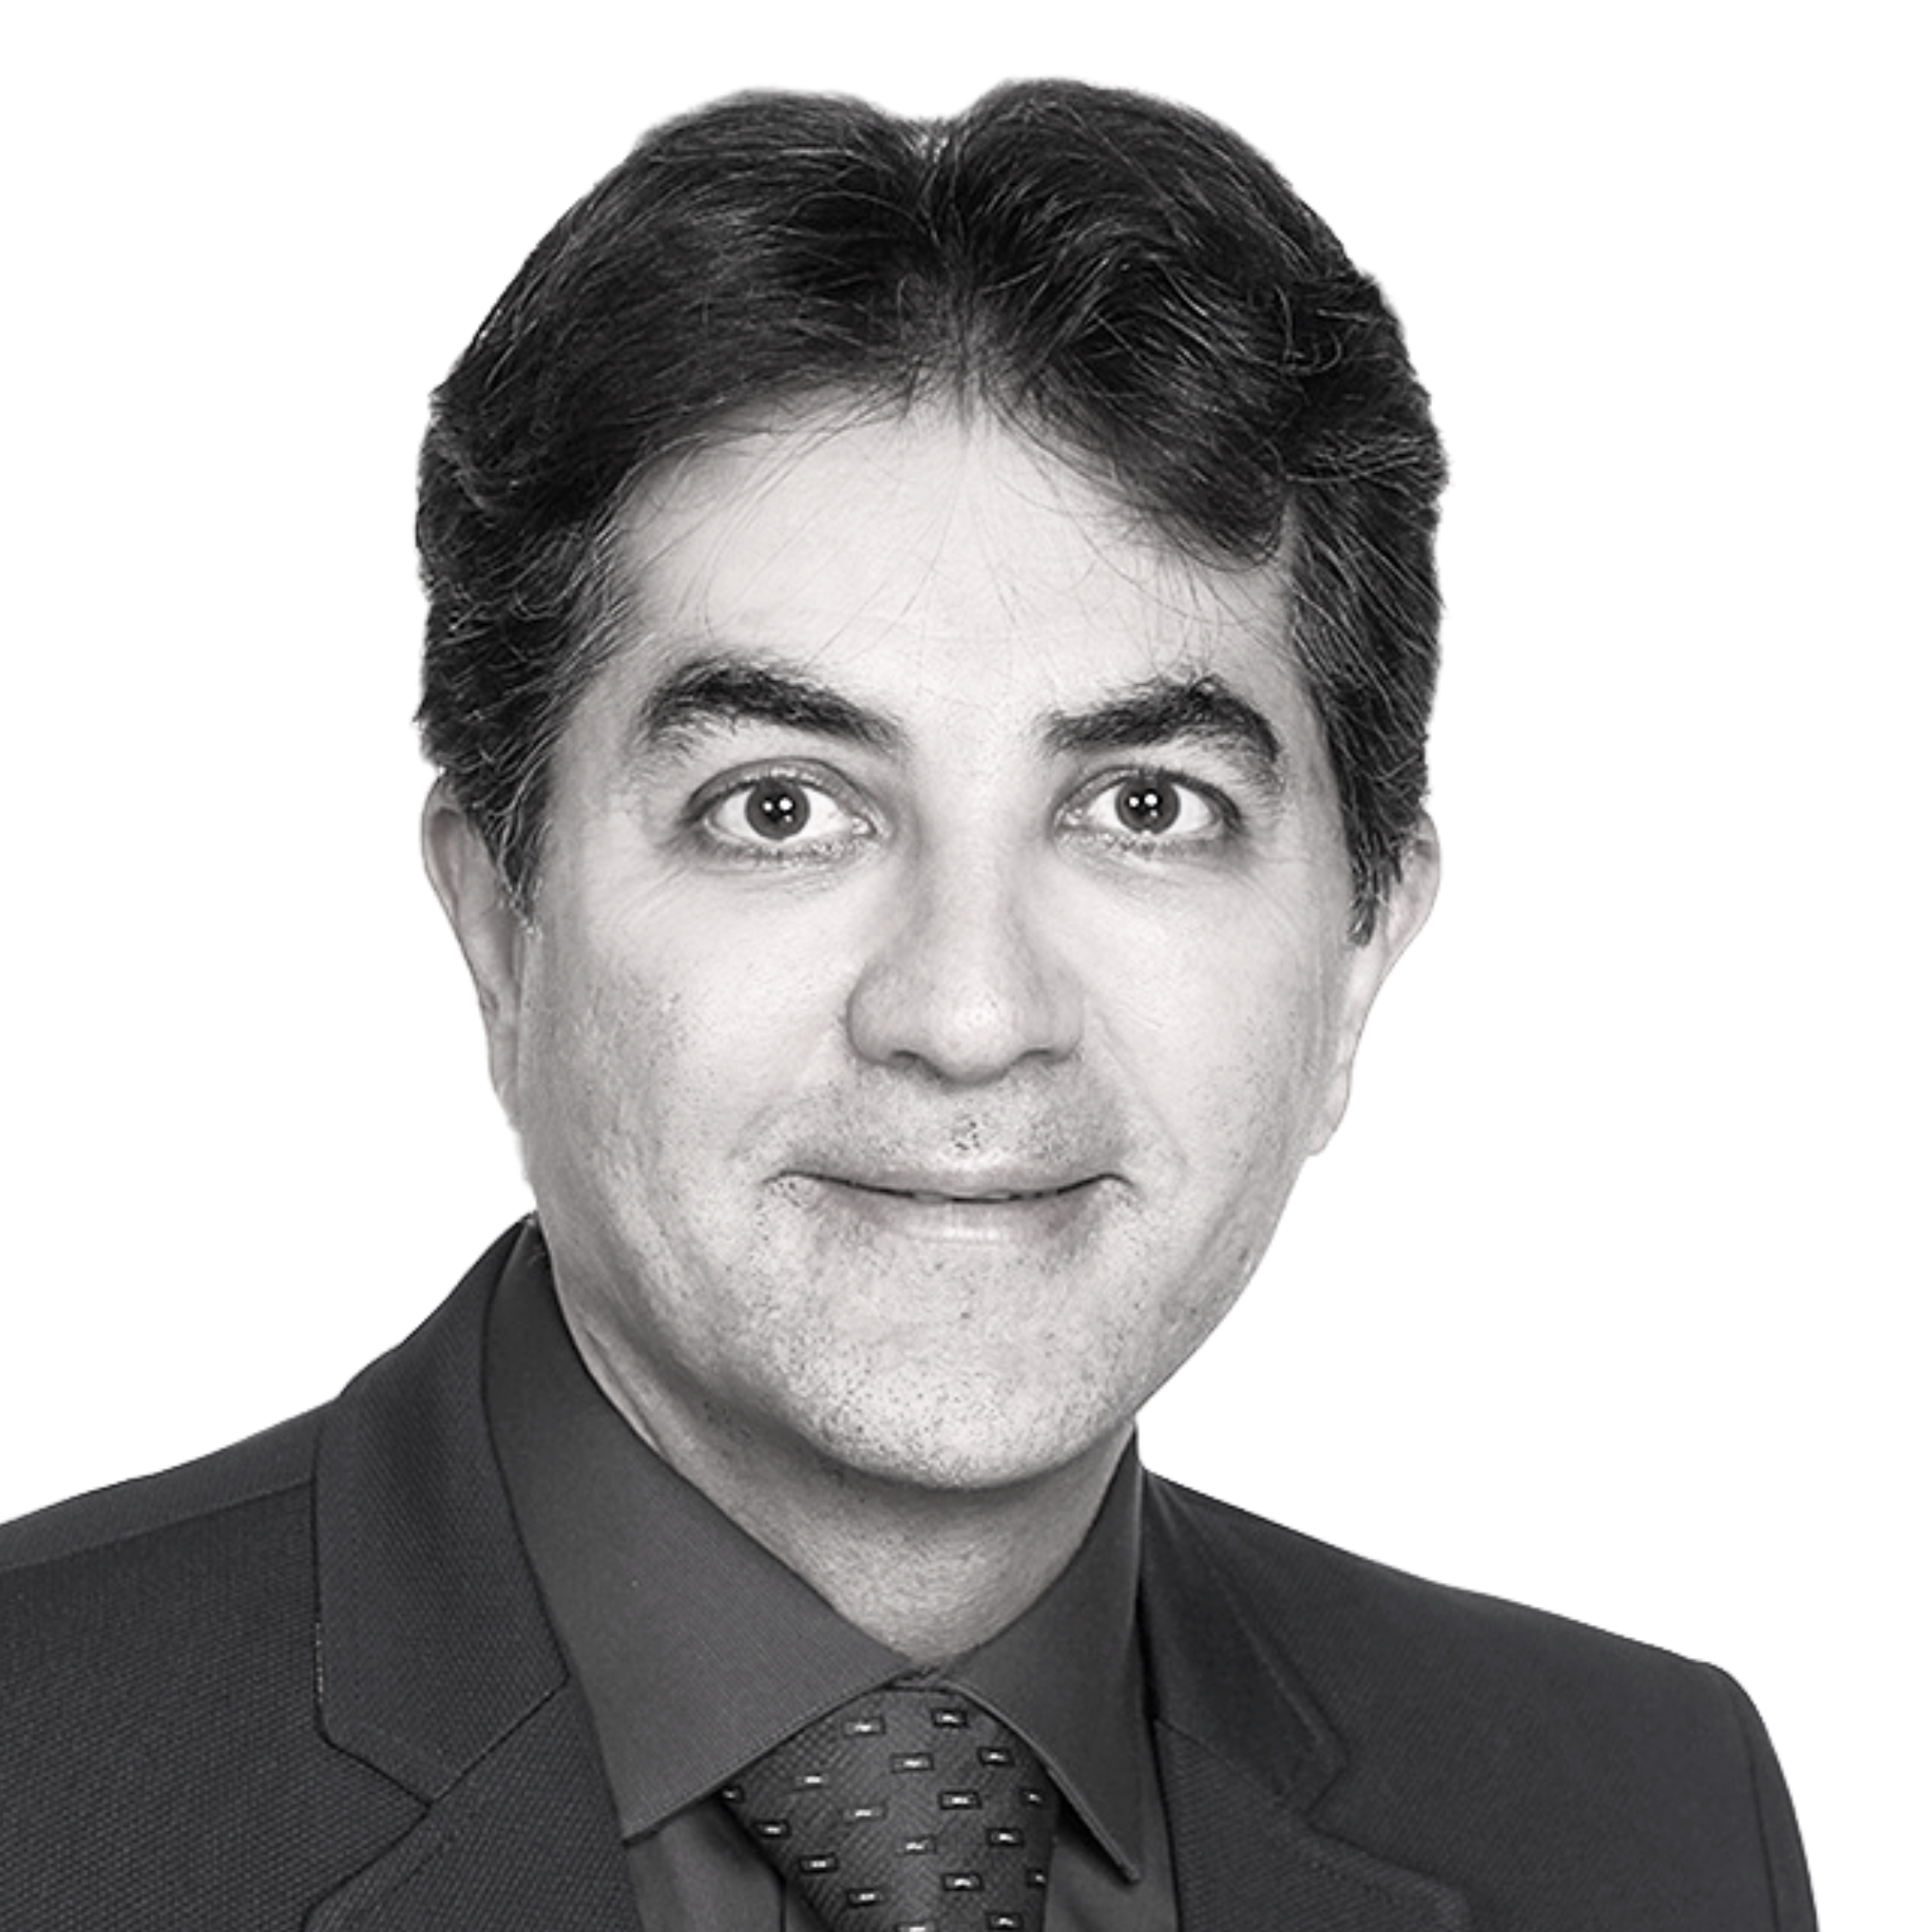 Mehran Ghoreishi Naturopathic Doctor, Black and white headshot of a middle-aged man with dark hair and dark eyes, wearing a suit and tie, smiling slightly at the camera